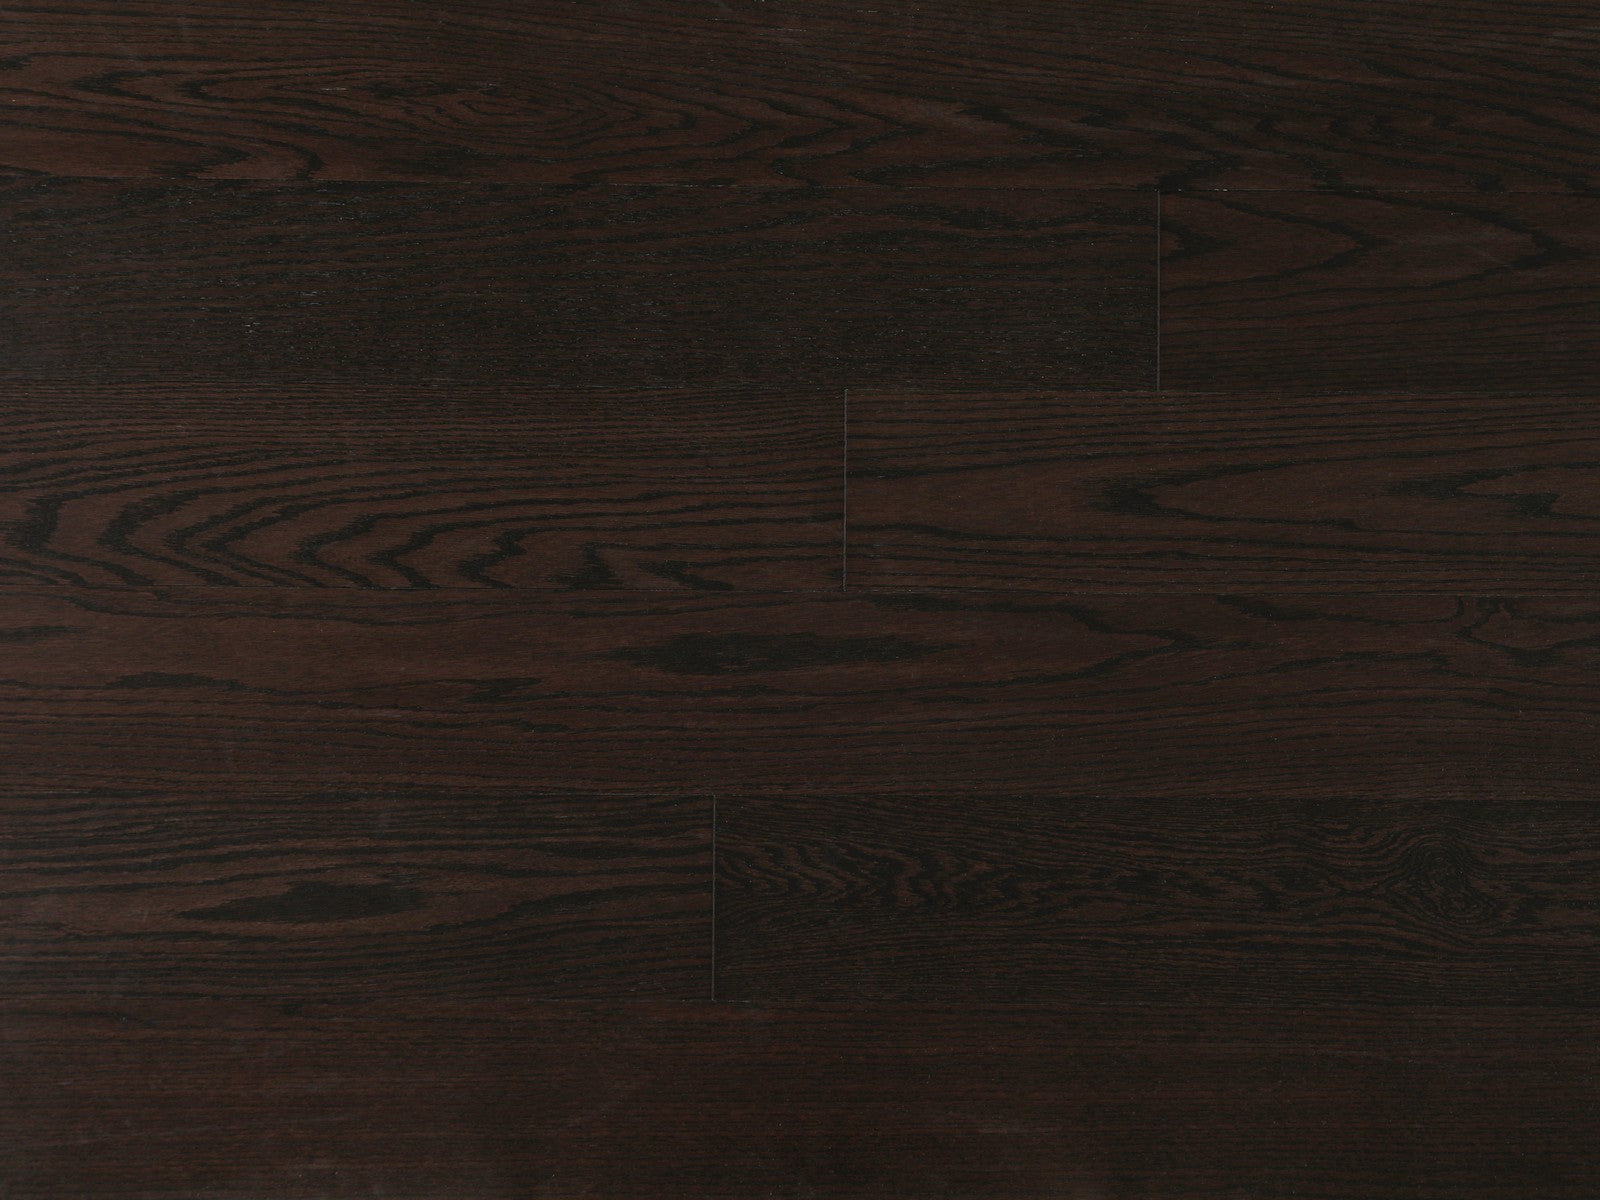 Ing. red oak wb.black brown gr: abcd 6" x 3/4" 2mm 22.29 pc/bte